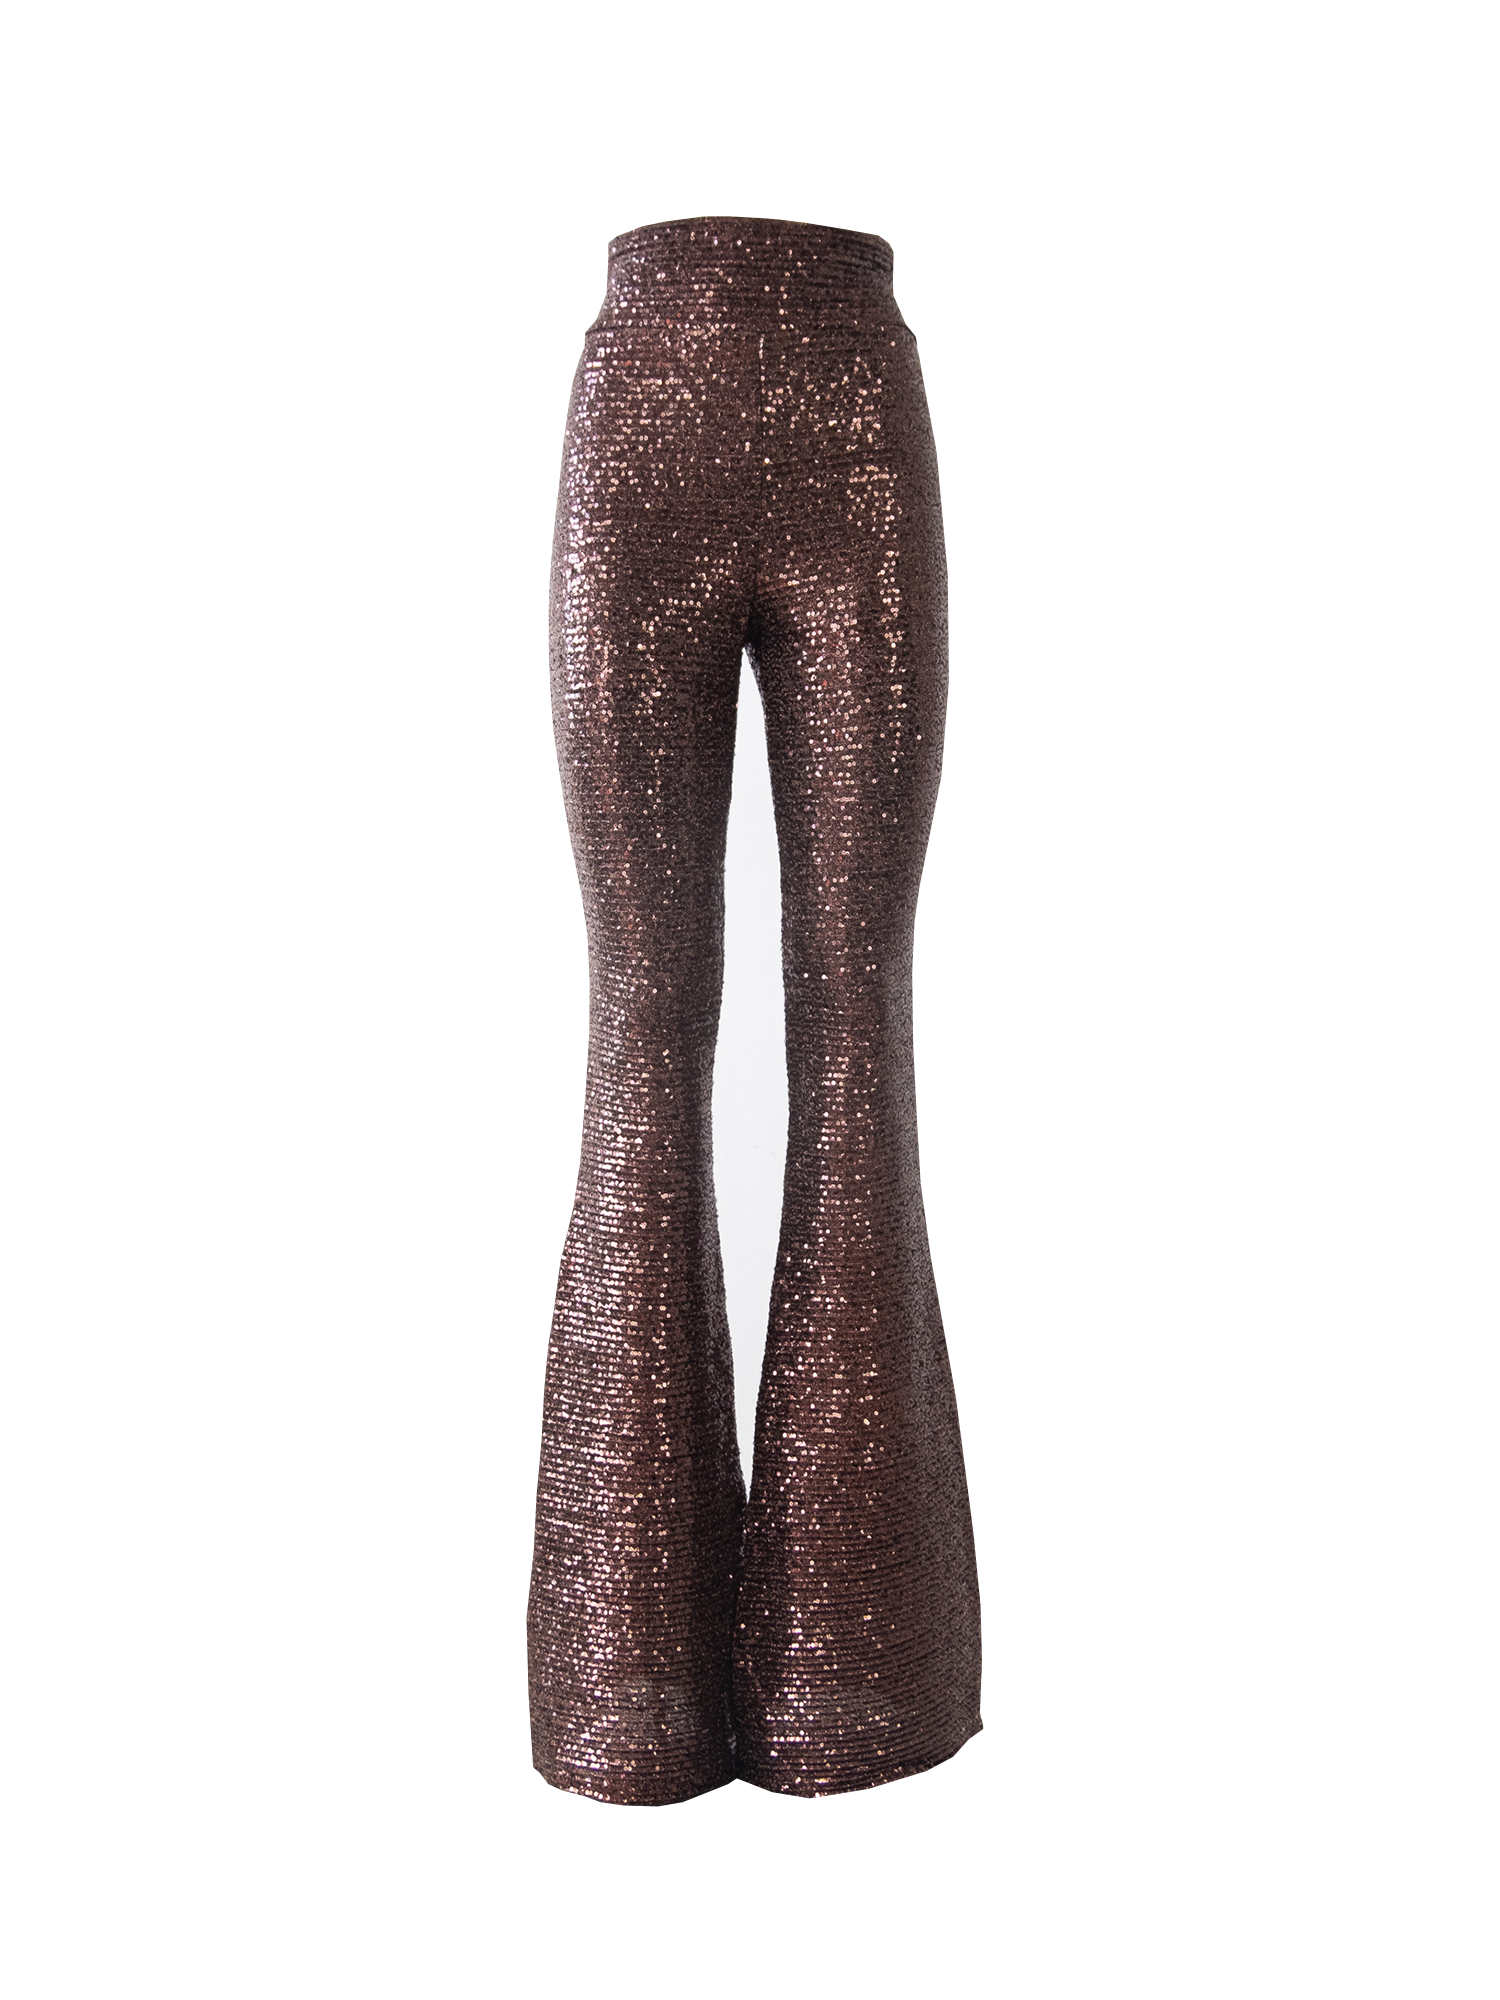 LOLA - flared trouser with high waist in sequin